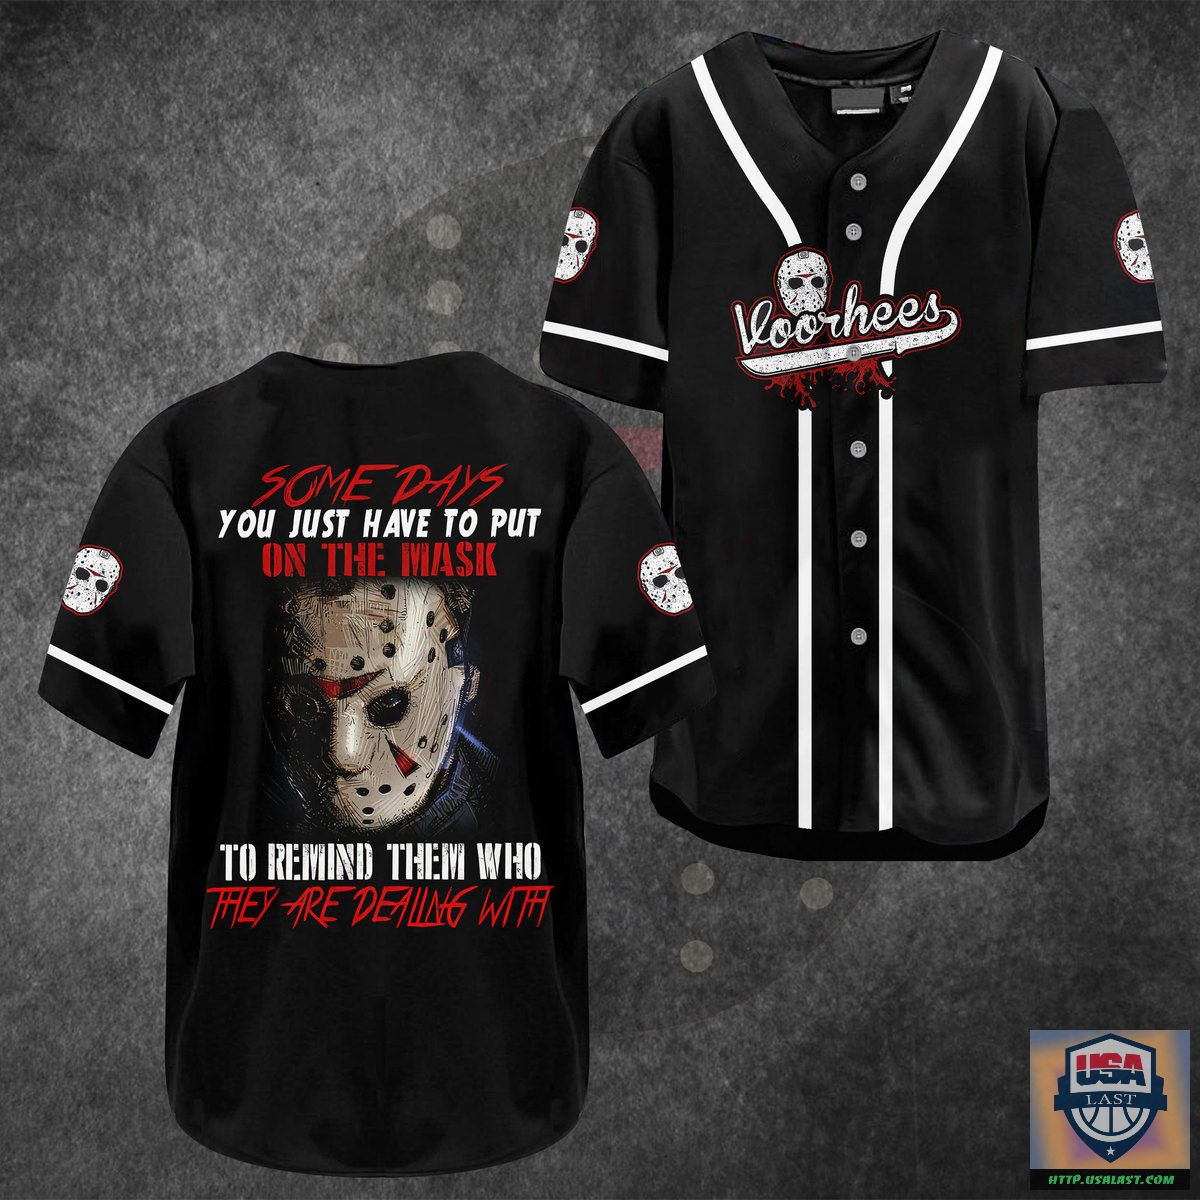 0OoBV6TF-T230722-68xxxJason-Voorhees-Some-Days-You-Just-Have-To-Put-On-The-Mask-Baseball-Jersey.jpg